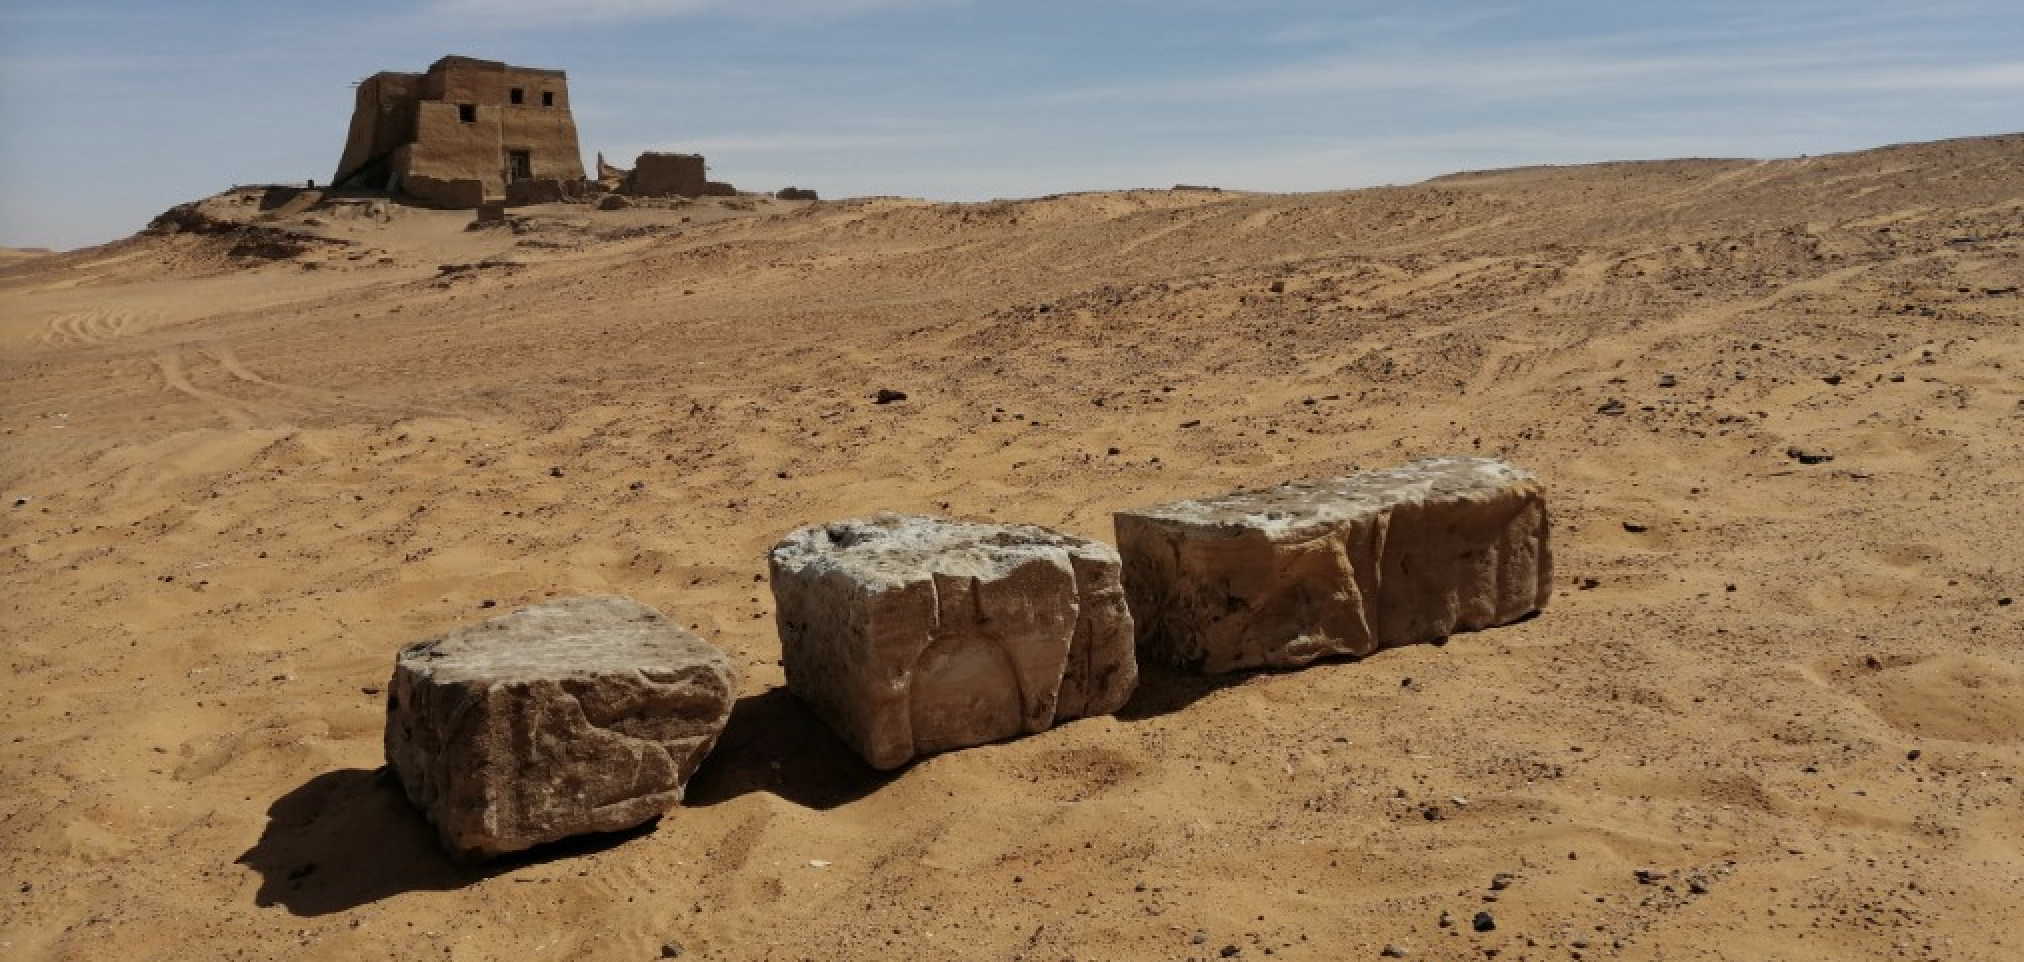 A photograph showing Blocks with hieroglyphs found in Old Dongola, Sudan. Image Credit: Dawid F. Wieczorek/PCMA UW.